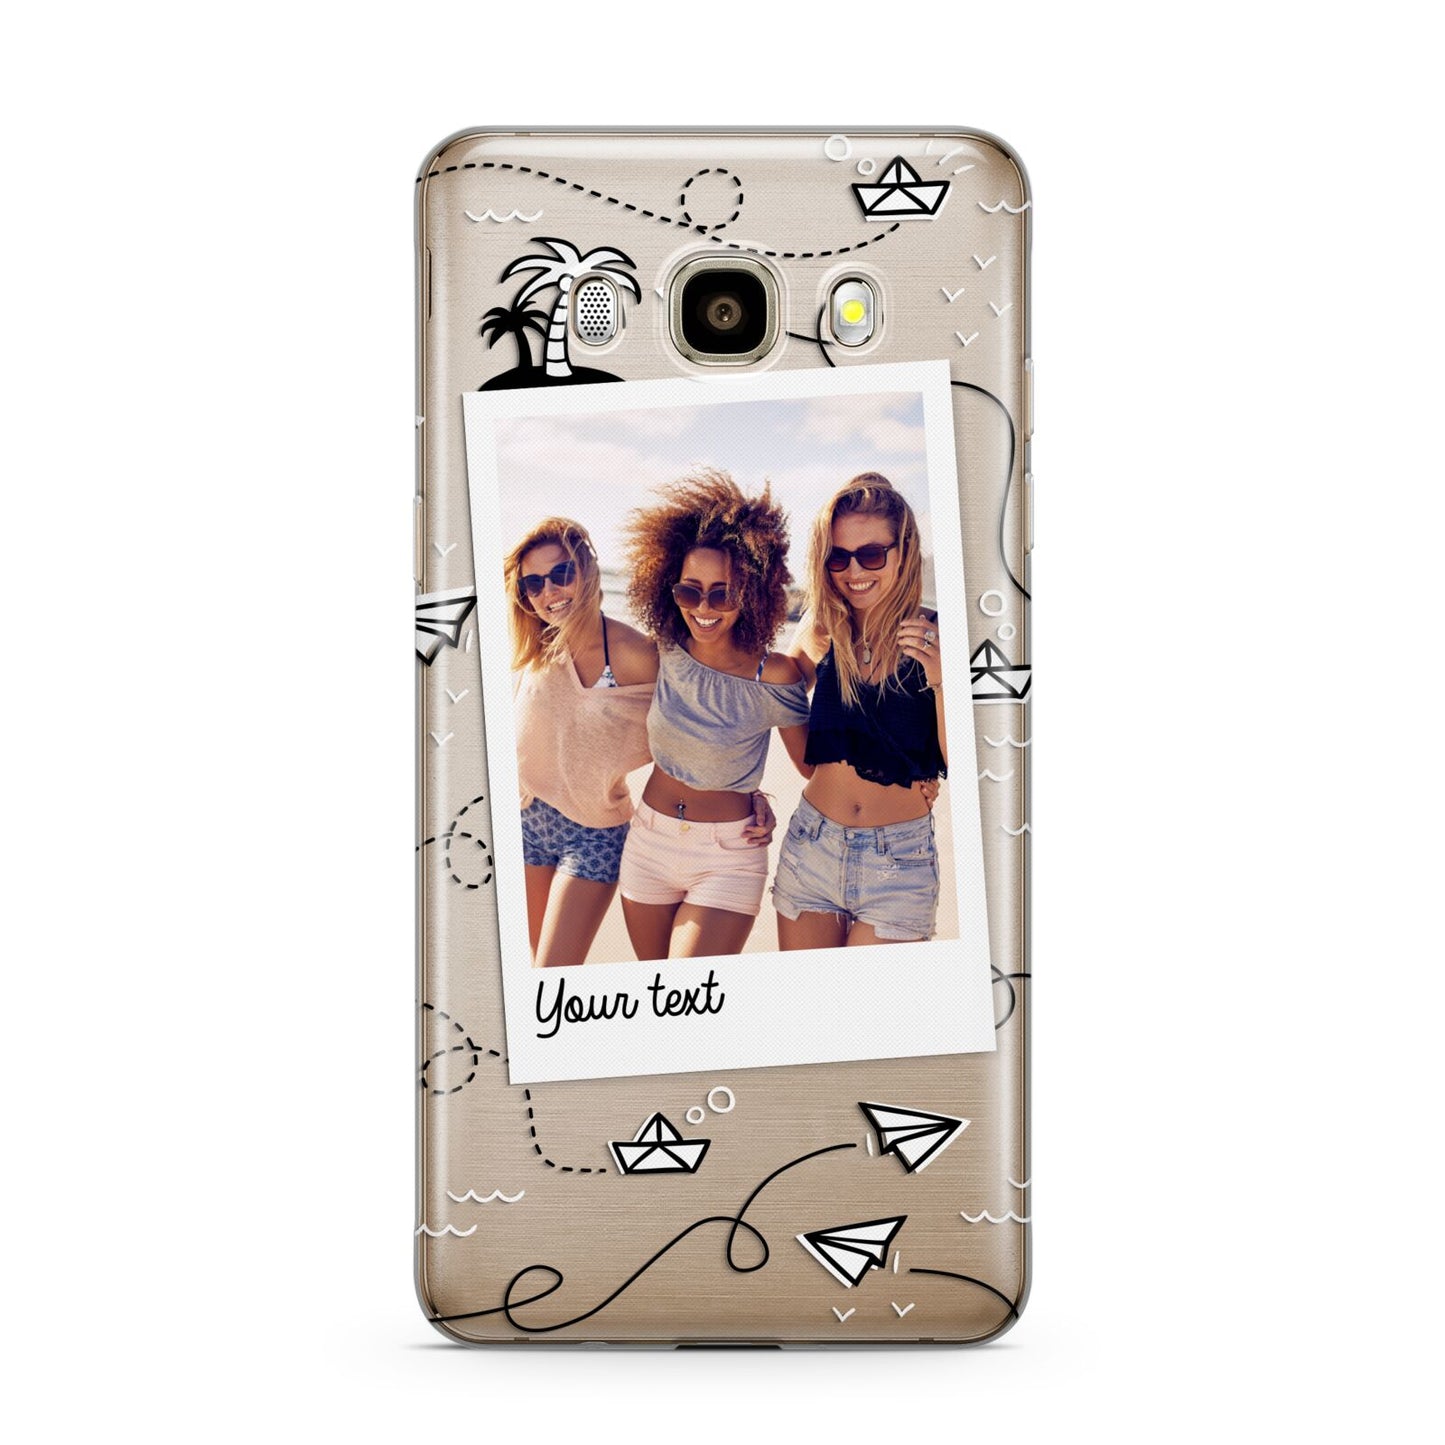 Personalised Photo Travel Samsung Galaxy J7 2016 Case on gold phone